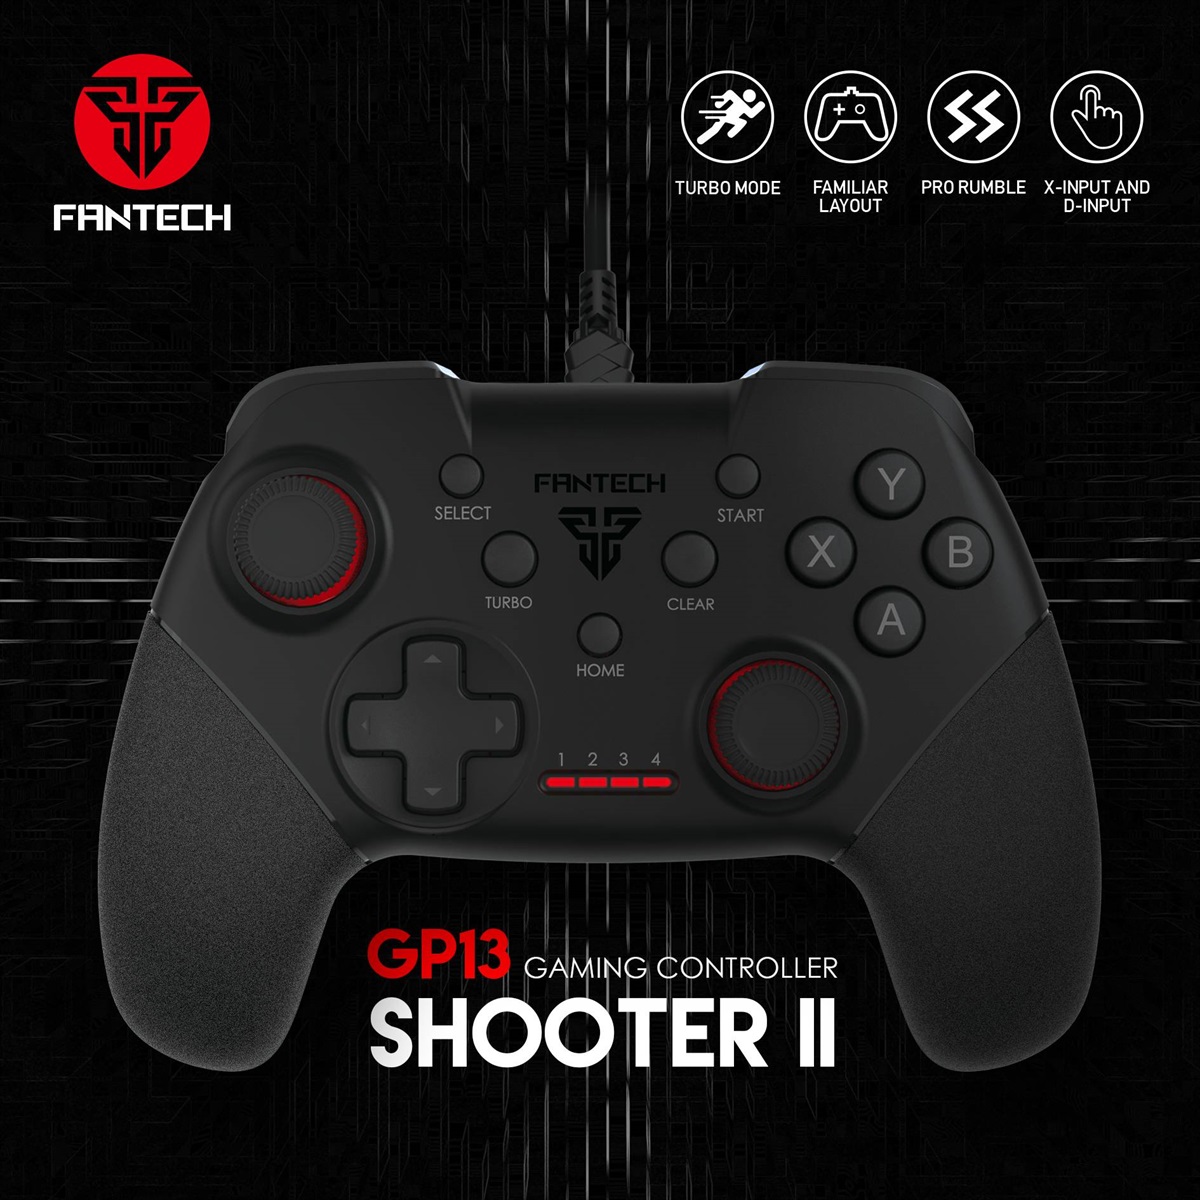 FANTECH SHOOTER II GP13 GAMING CONTROLLER GAME PAD FOR PC/PS3